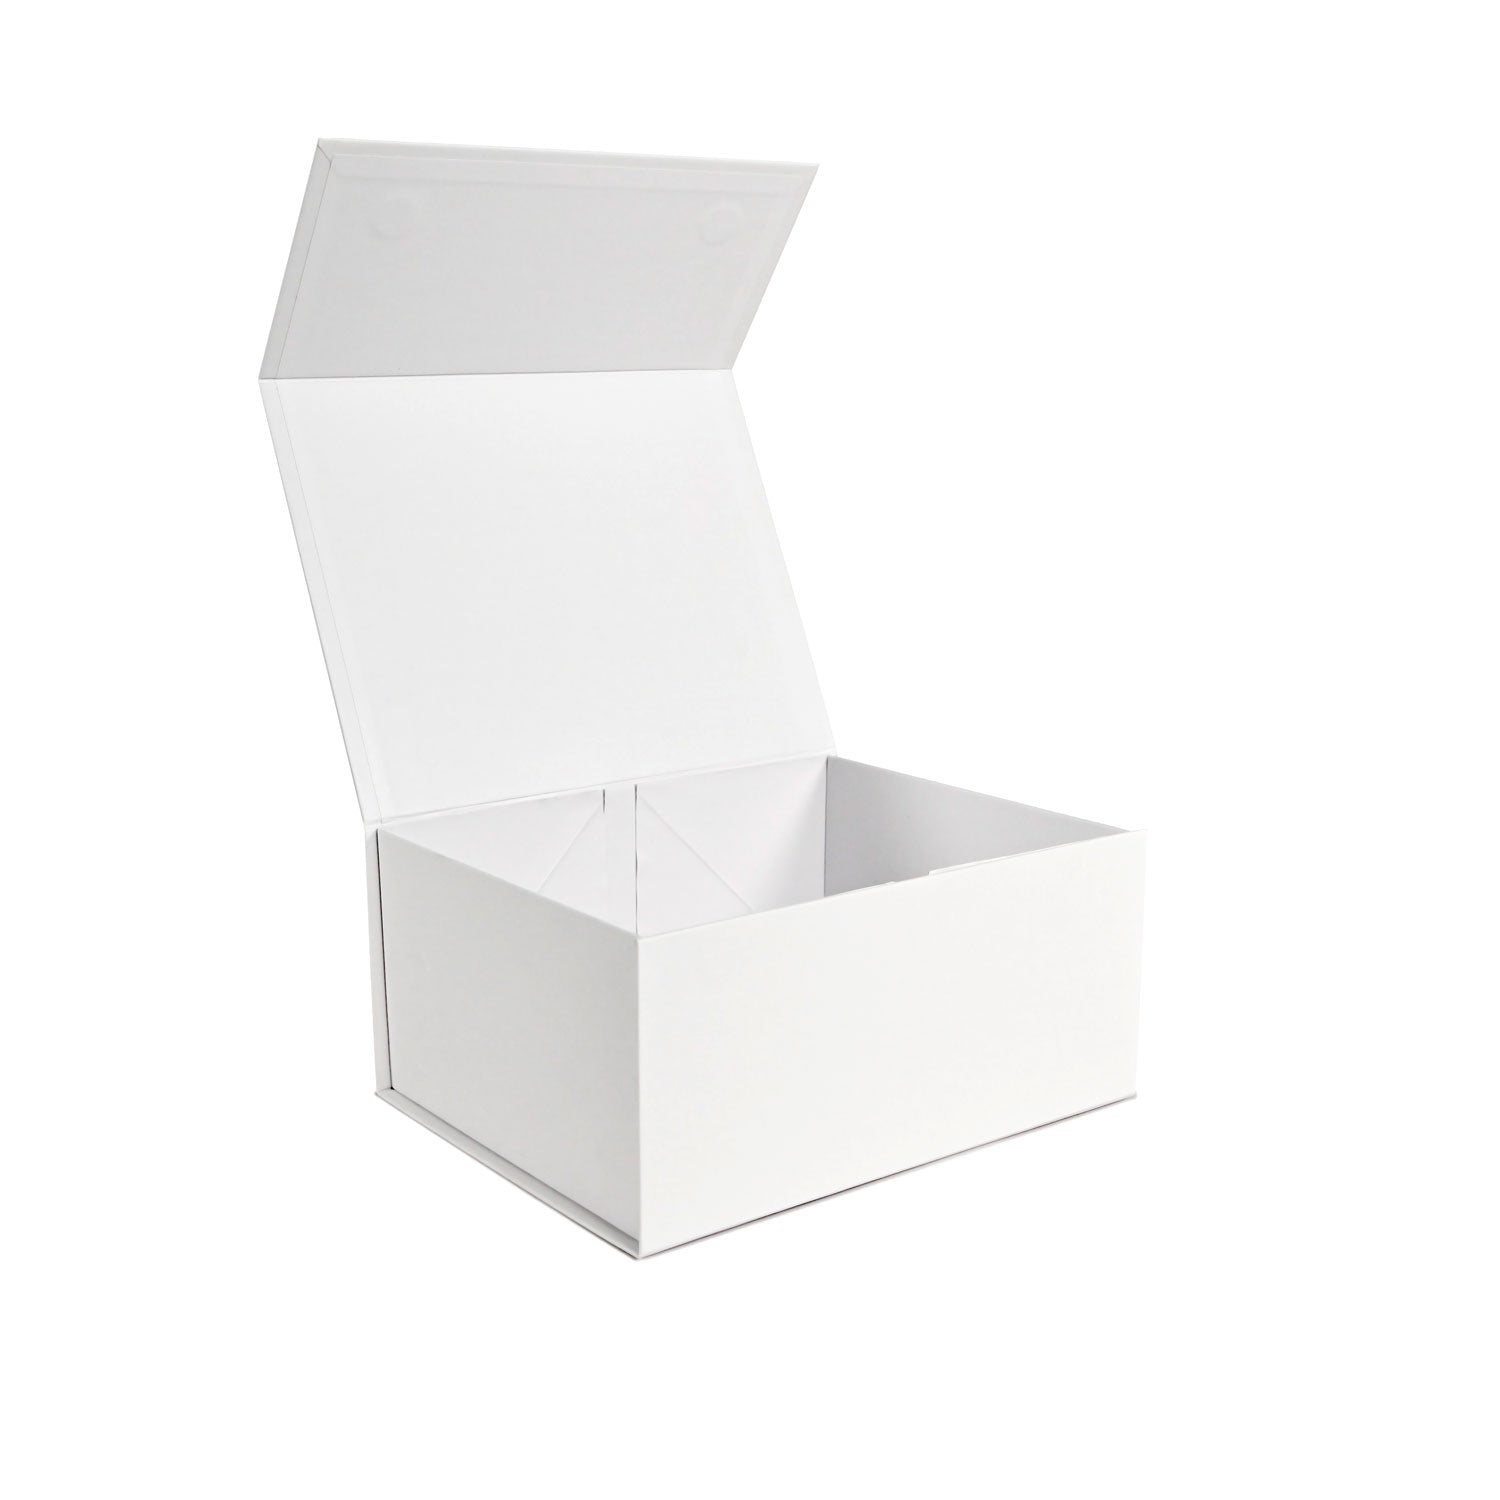 A medium white gift box with an open lid on a white background | NEON Packaging